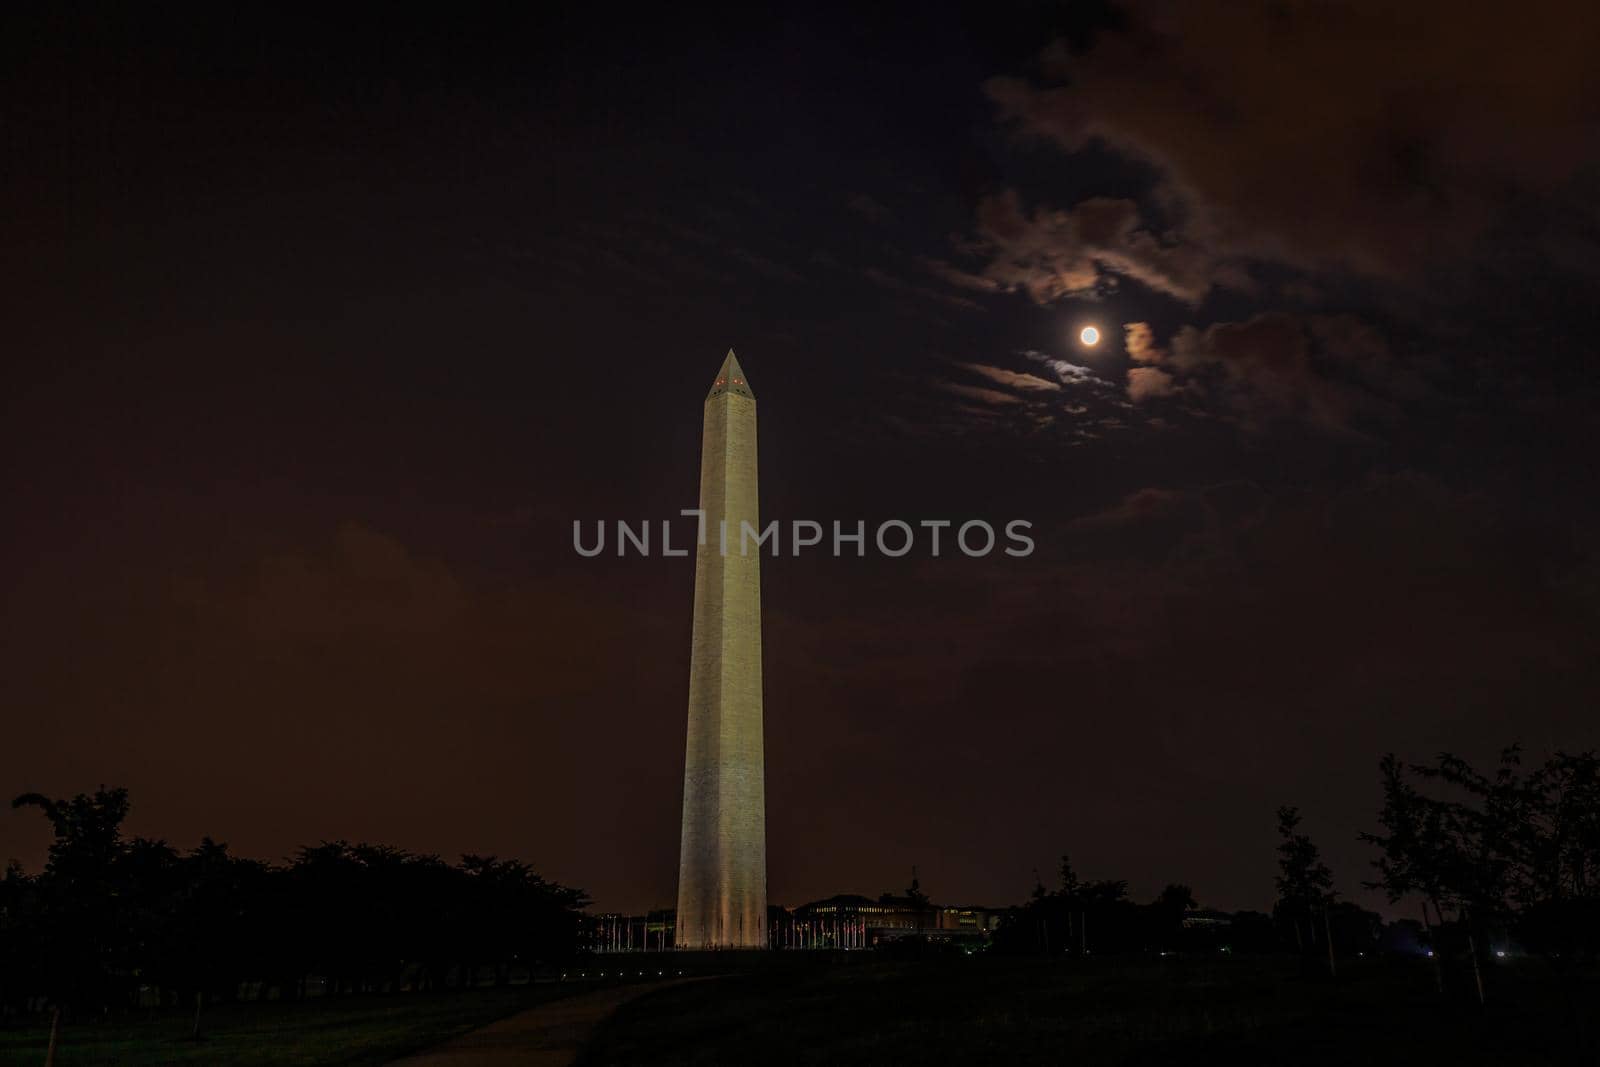 Washington Monument viewed in the late night.